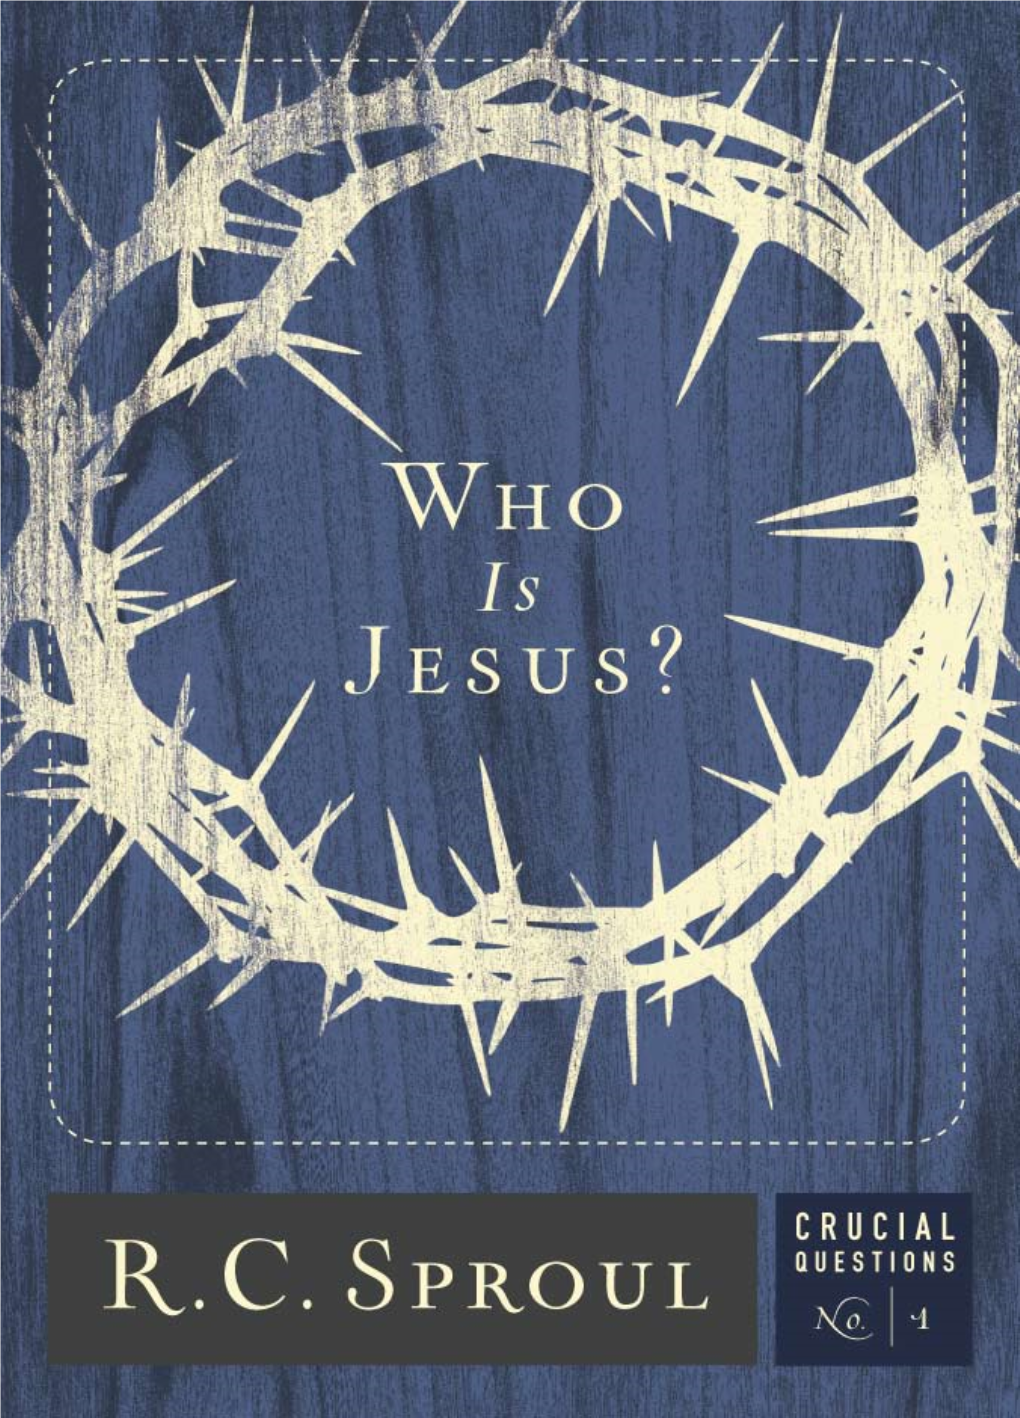 Who Is Jesus? the Crucial Questions Series by R